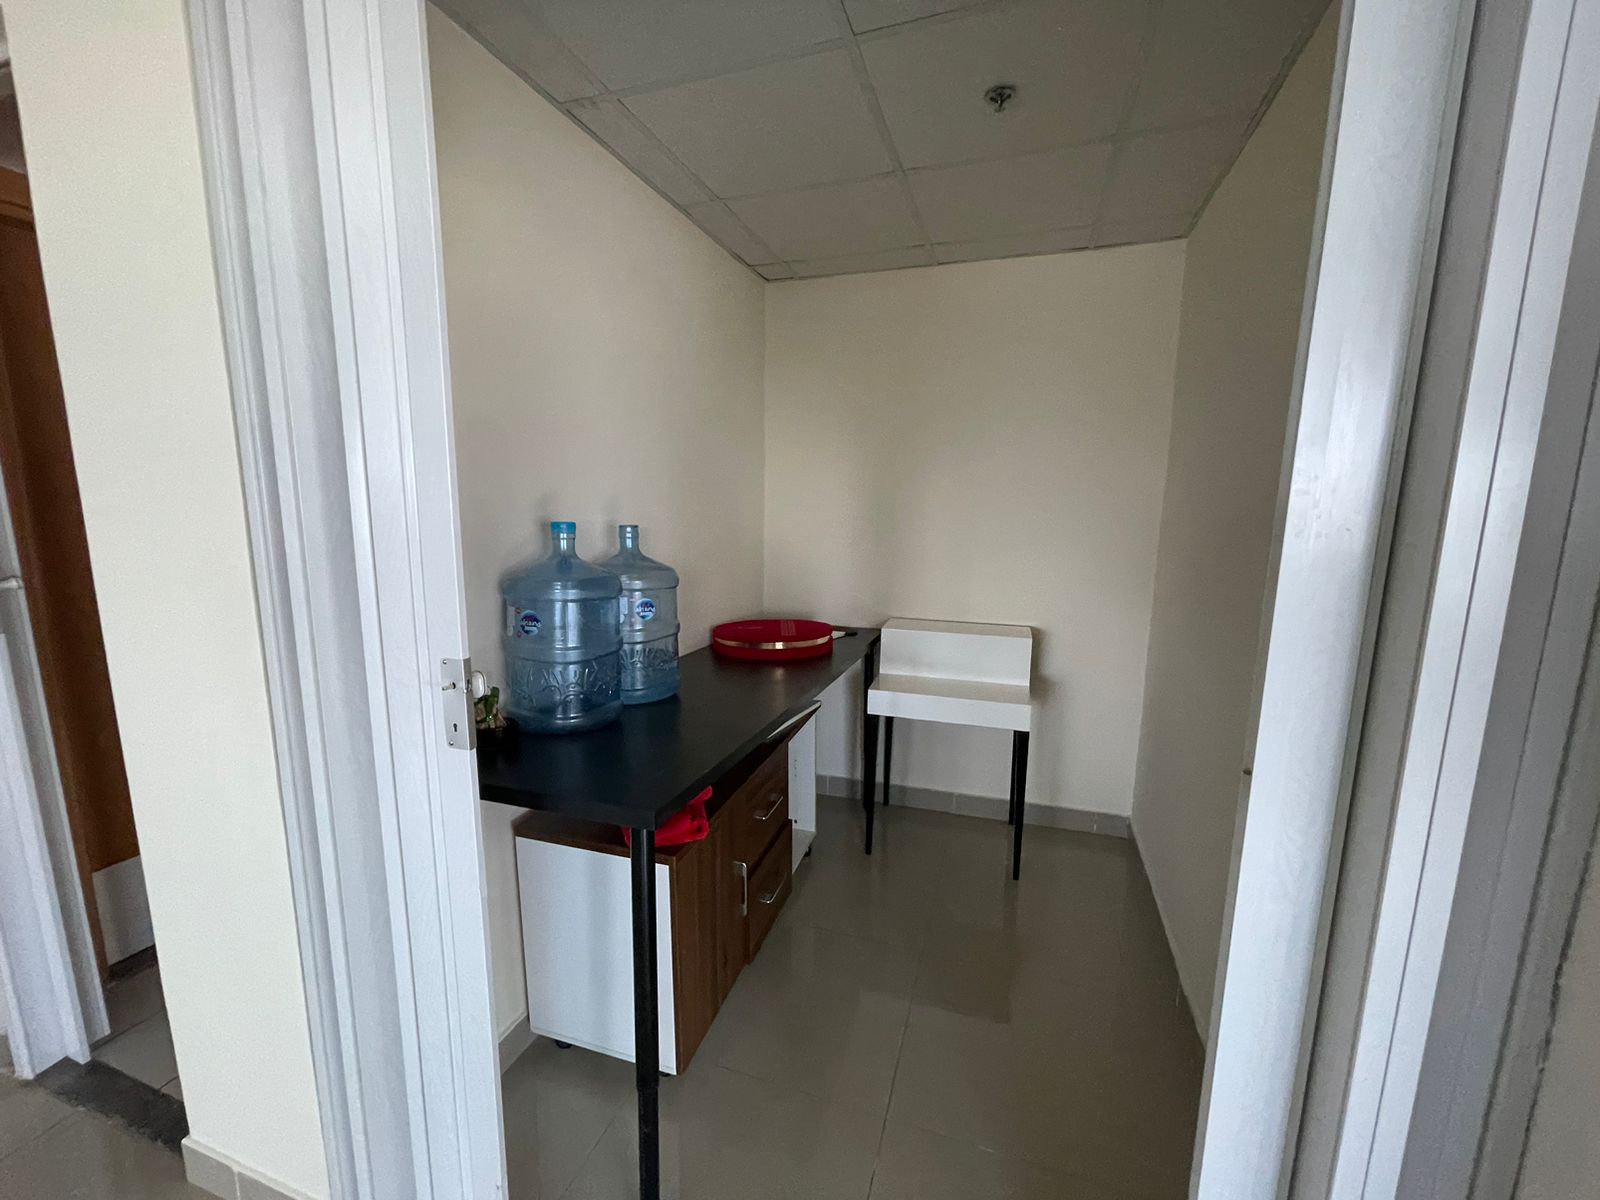 FULLY FURNISHED |1,300 SQ FT OFFICE |  FULLY FITTED | WASHROOM  AND PANTRY INSIDE |